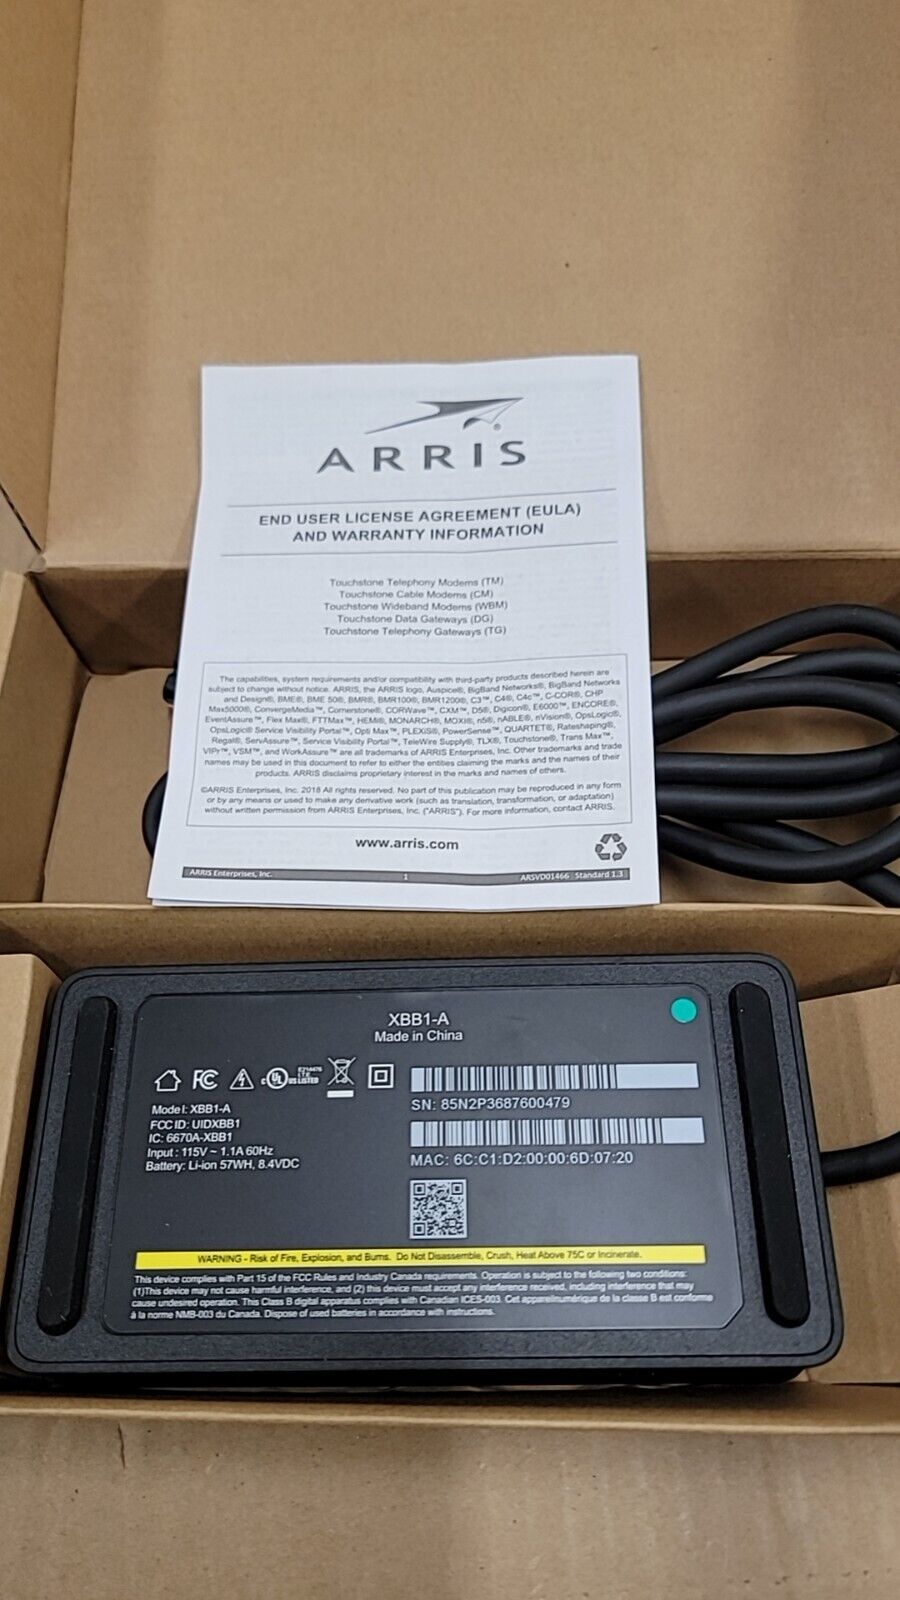 Arris touchstone XBB1-a Battery backup devices For XB6 cable modem 57WH 8.4VDC